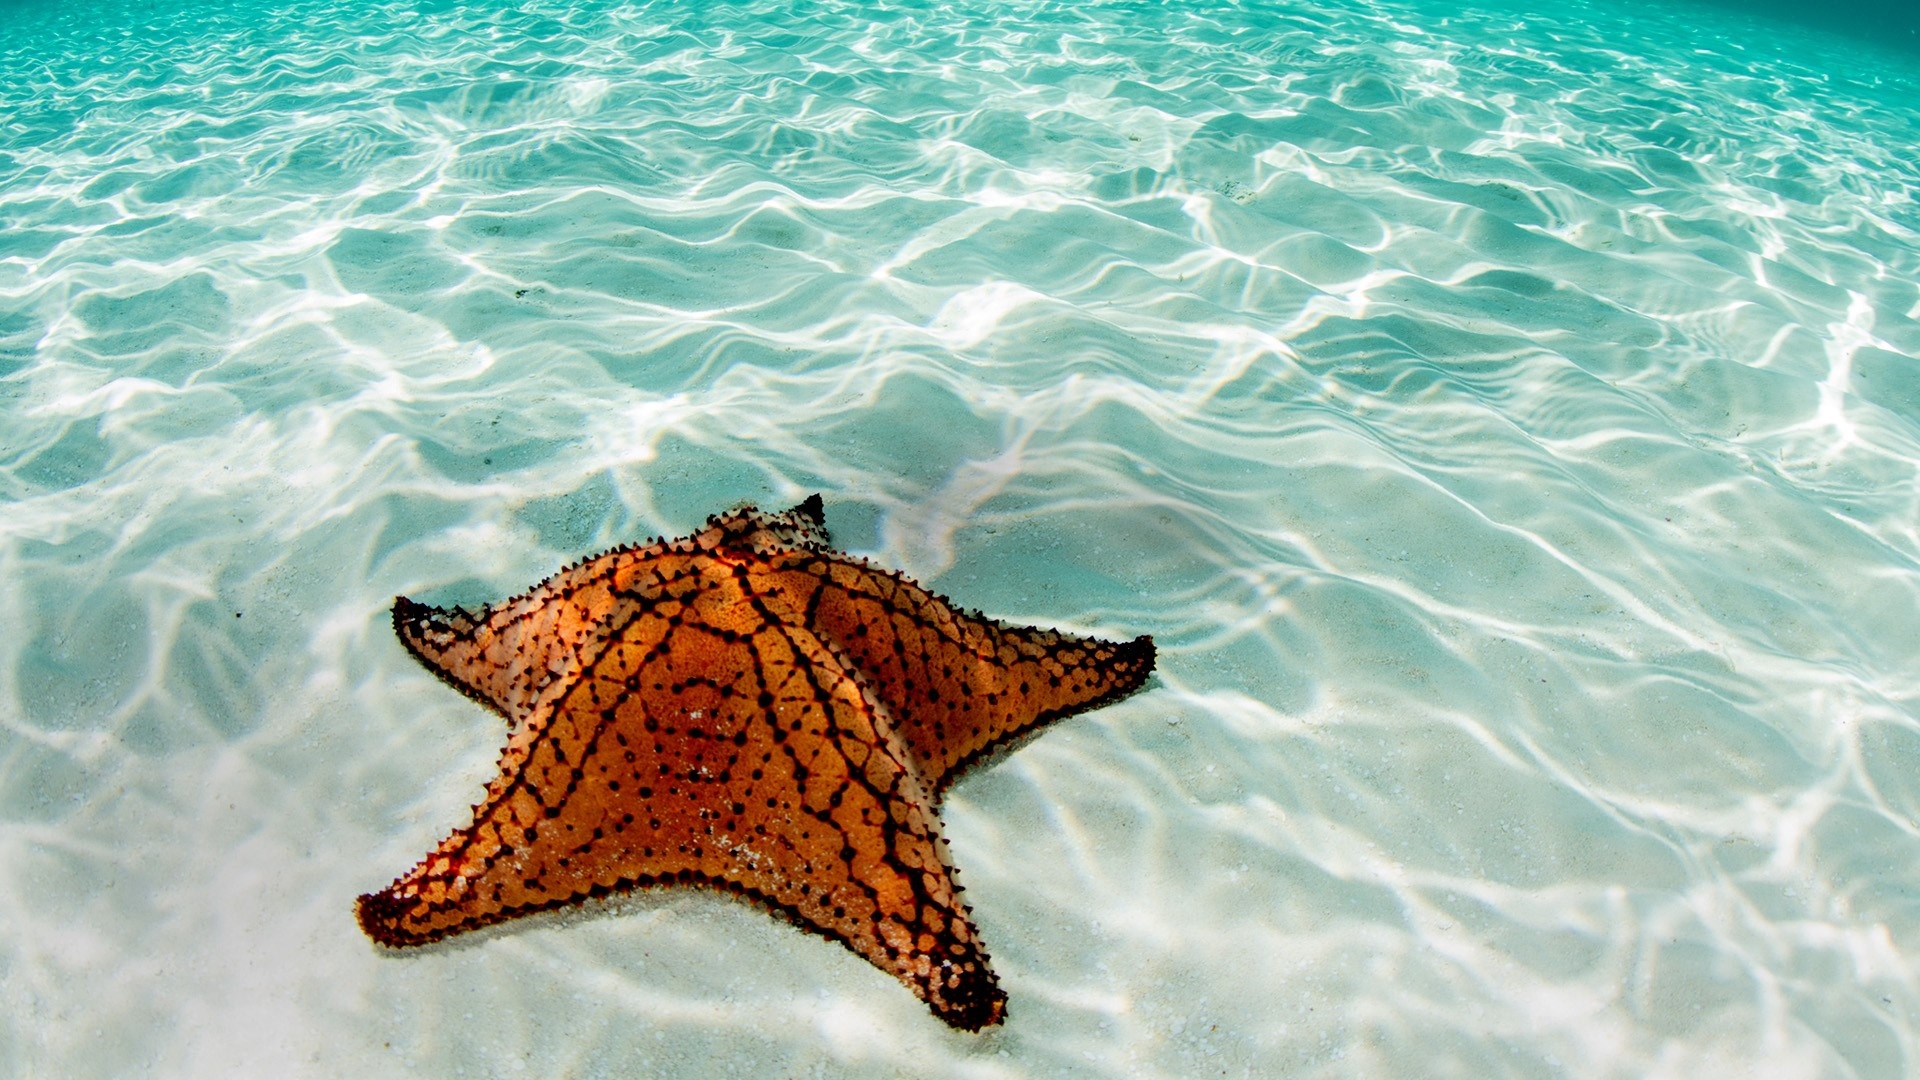 Sea Star: West Indian starfish, The coast of Belize, Mesoamerican Barrier Reef System. 1920x1080 Full HD Wallpaper.